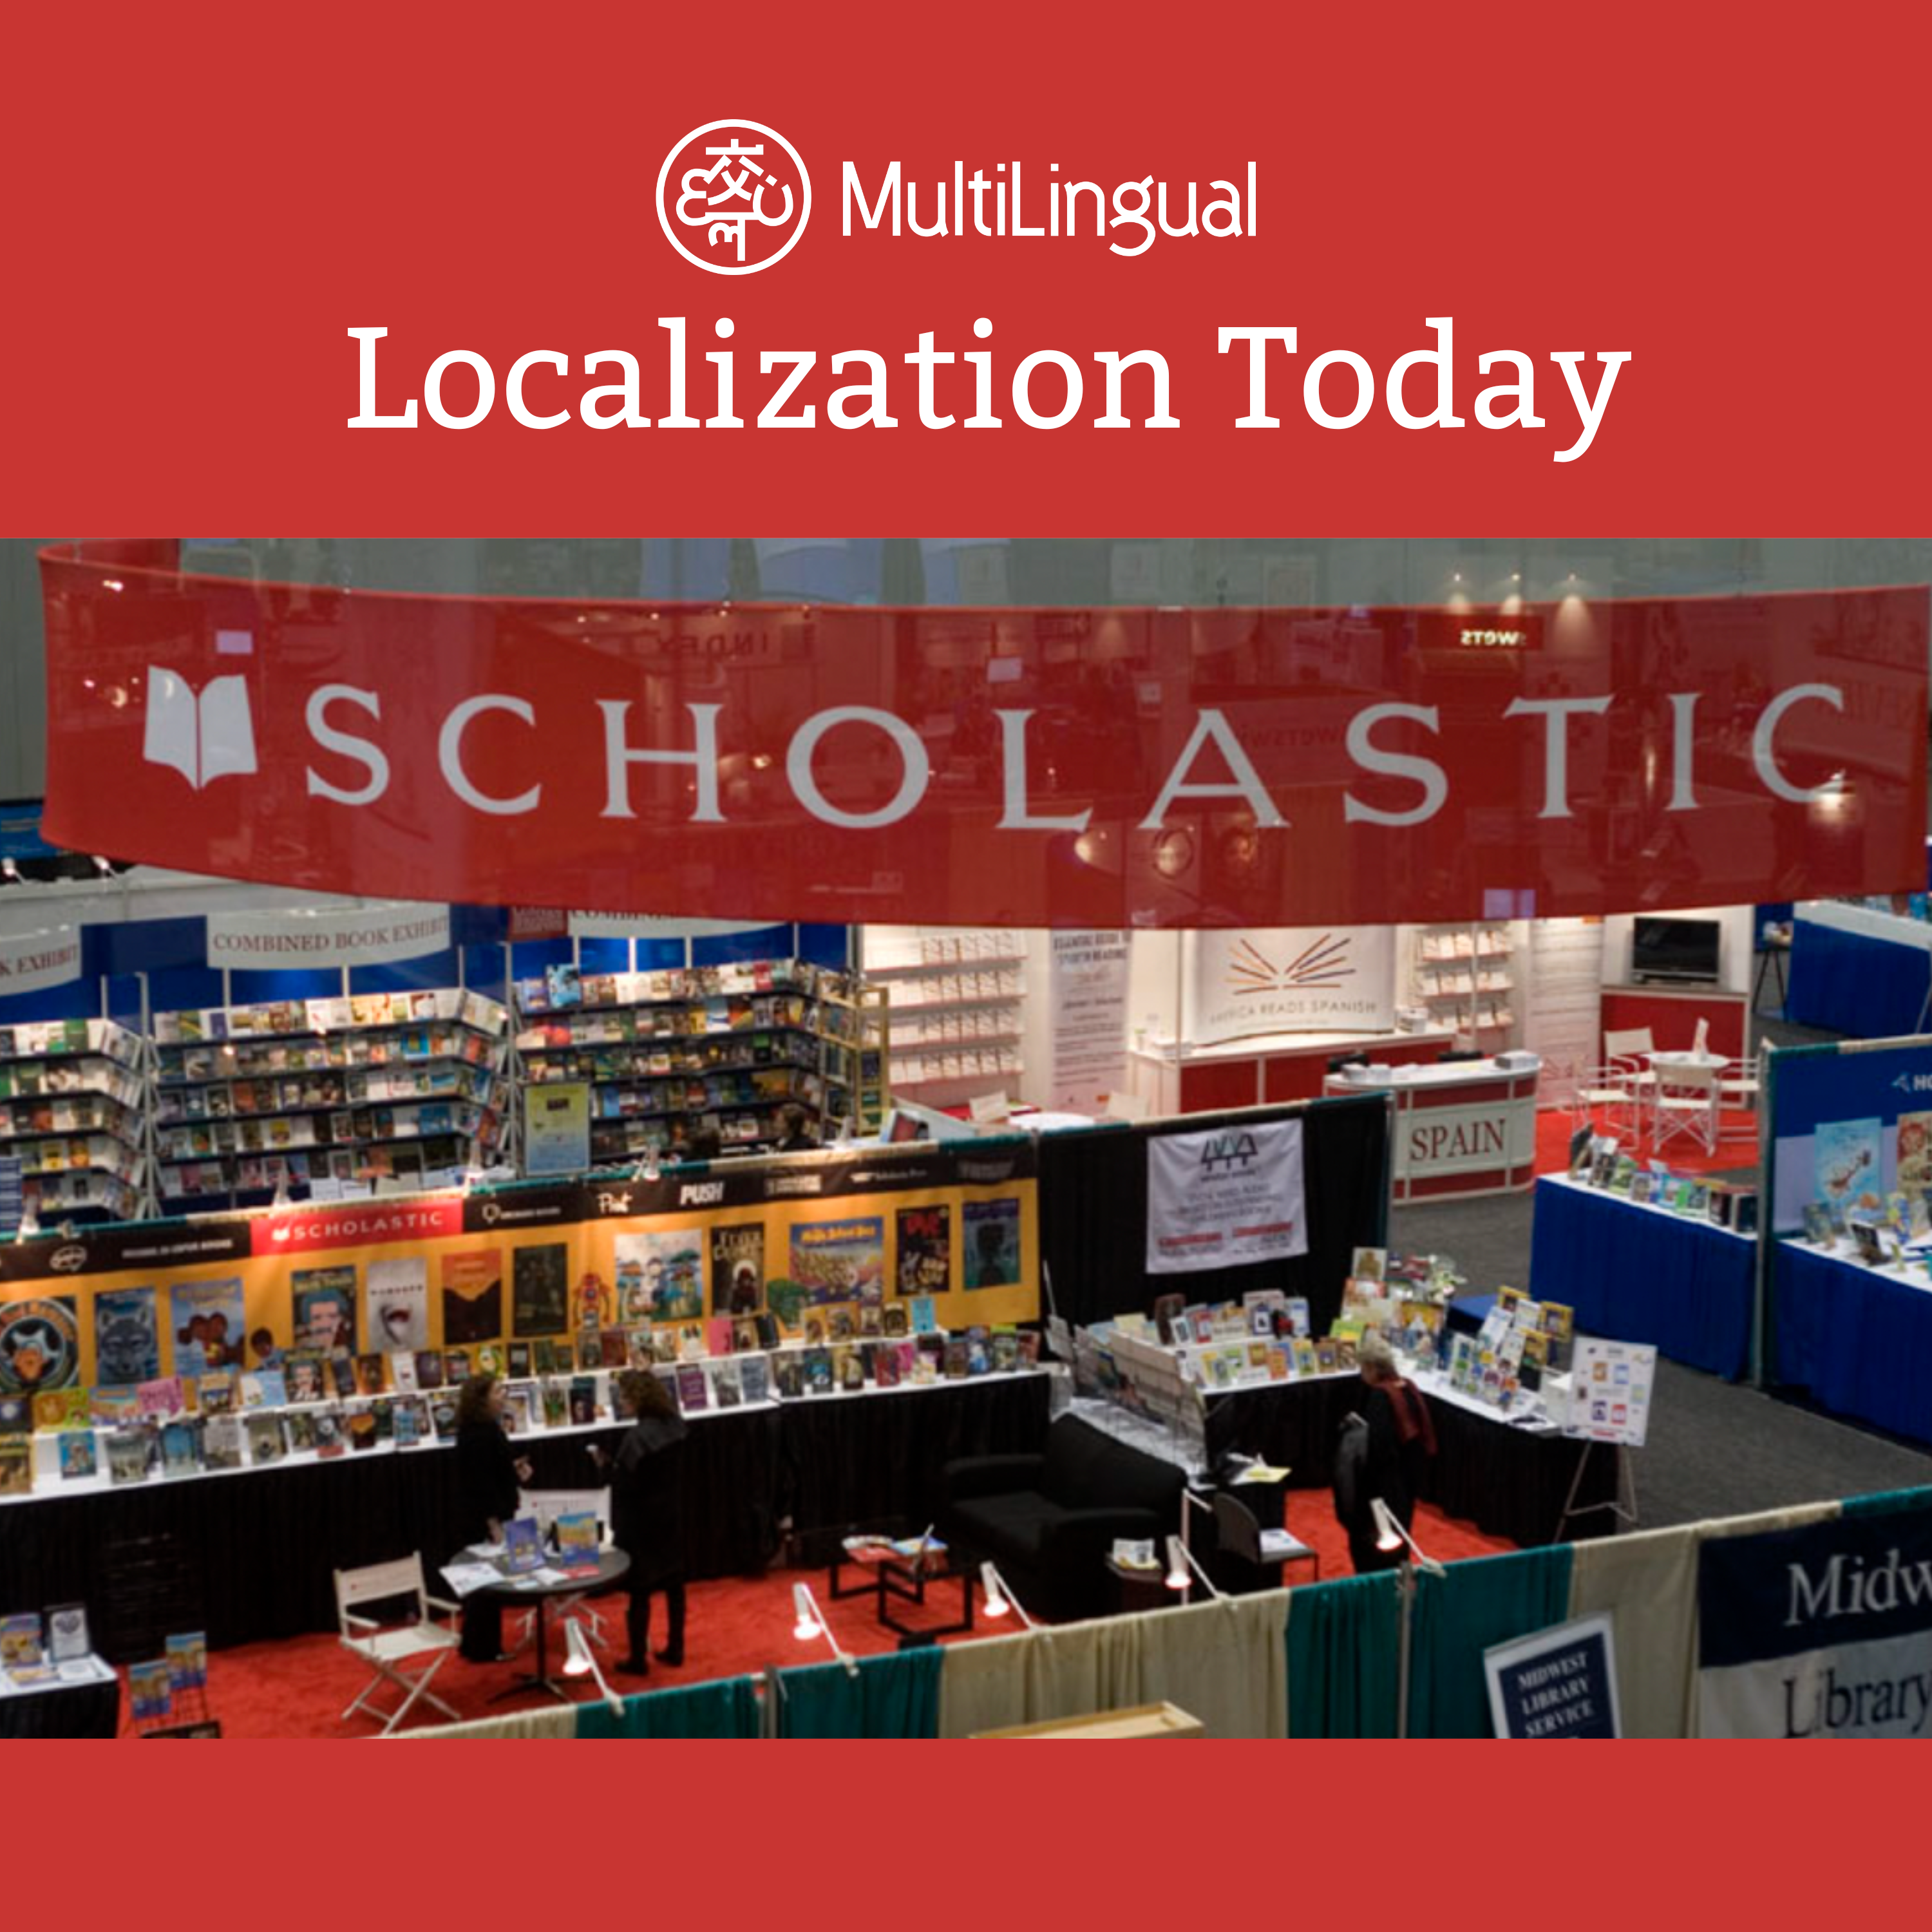 Artificial intelligence in the classroom: Scholastic and SoapBox Labs partner up on AI-powered curriculum